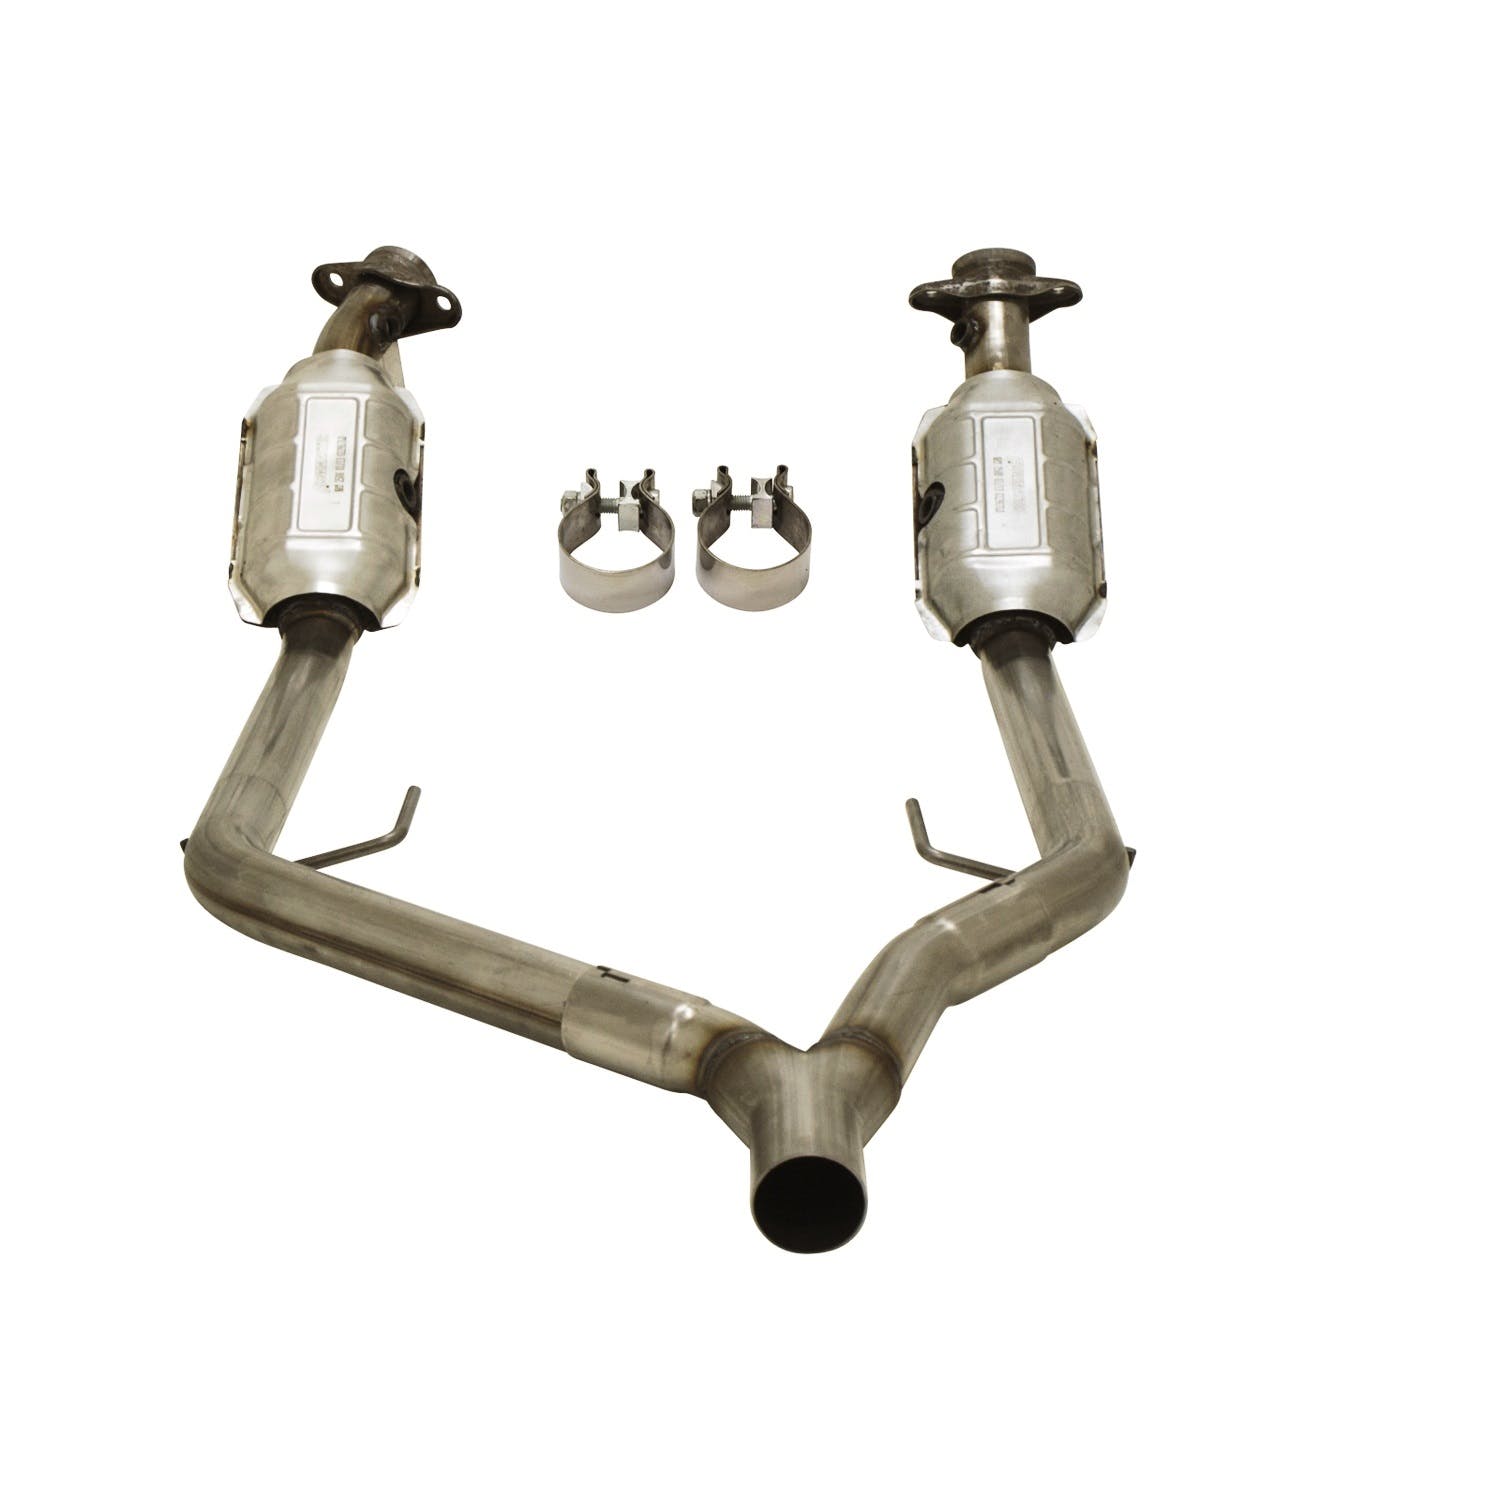 Flowmaster Catalytic Converters 2020040 Catalytic Converter-Direct Fit-2.25 in. Inlet/Outlet-49 State